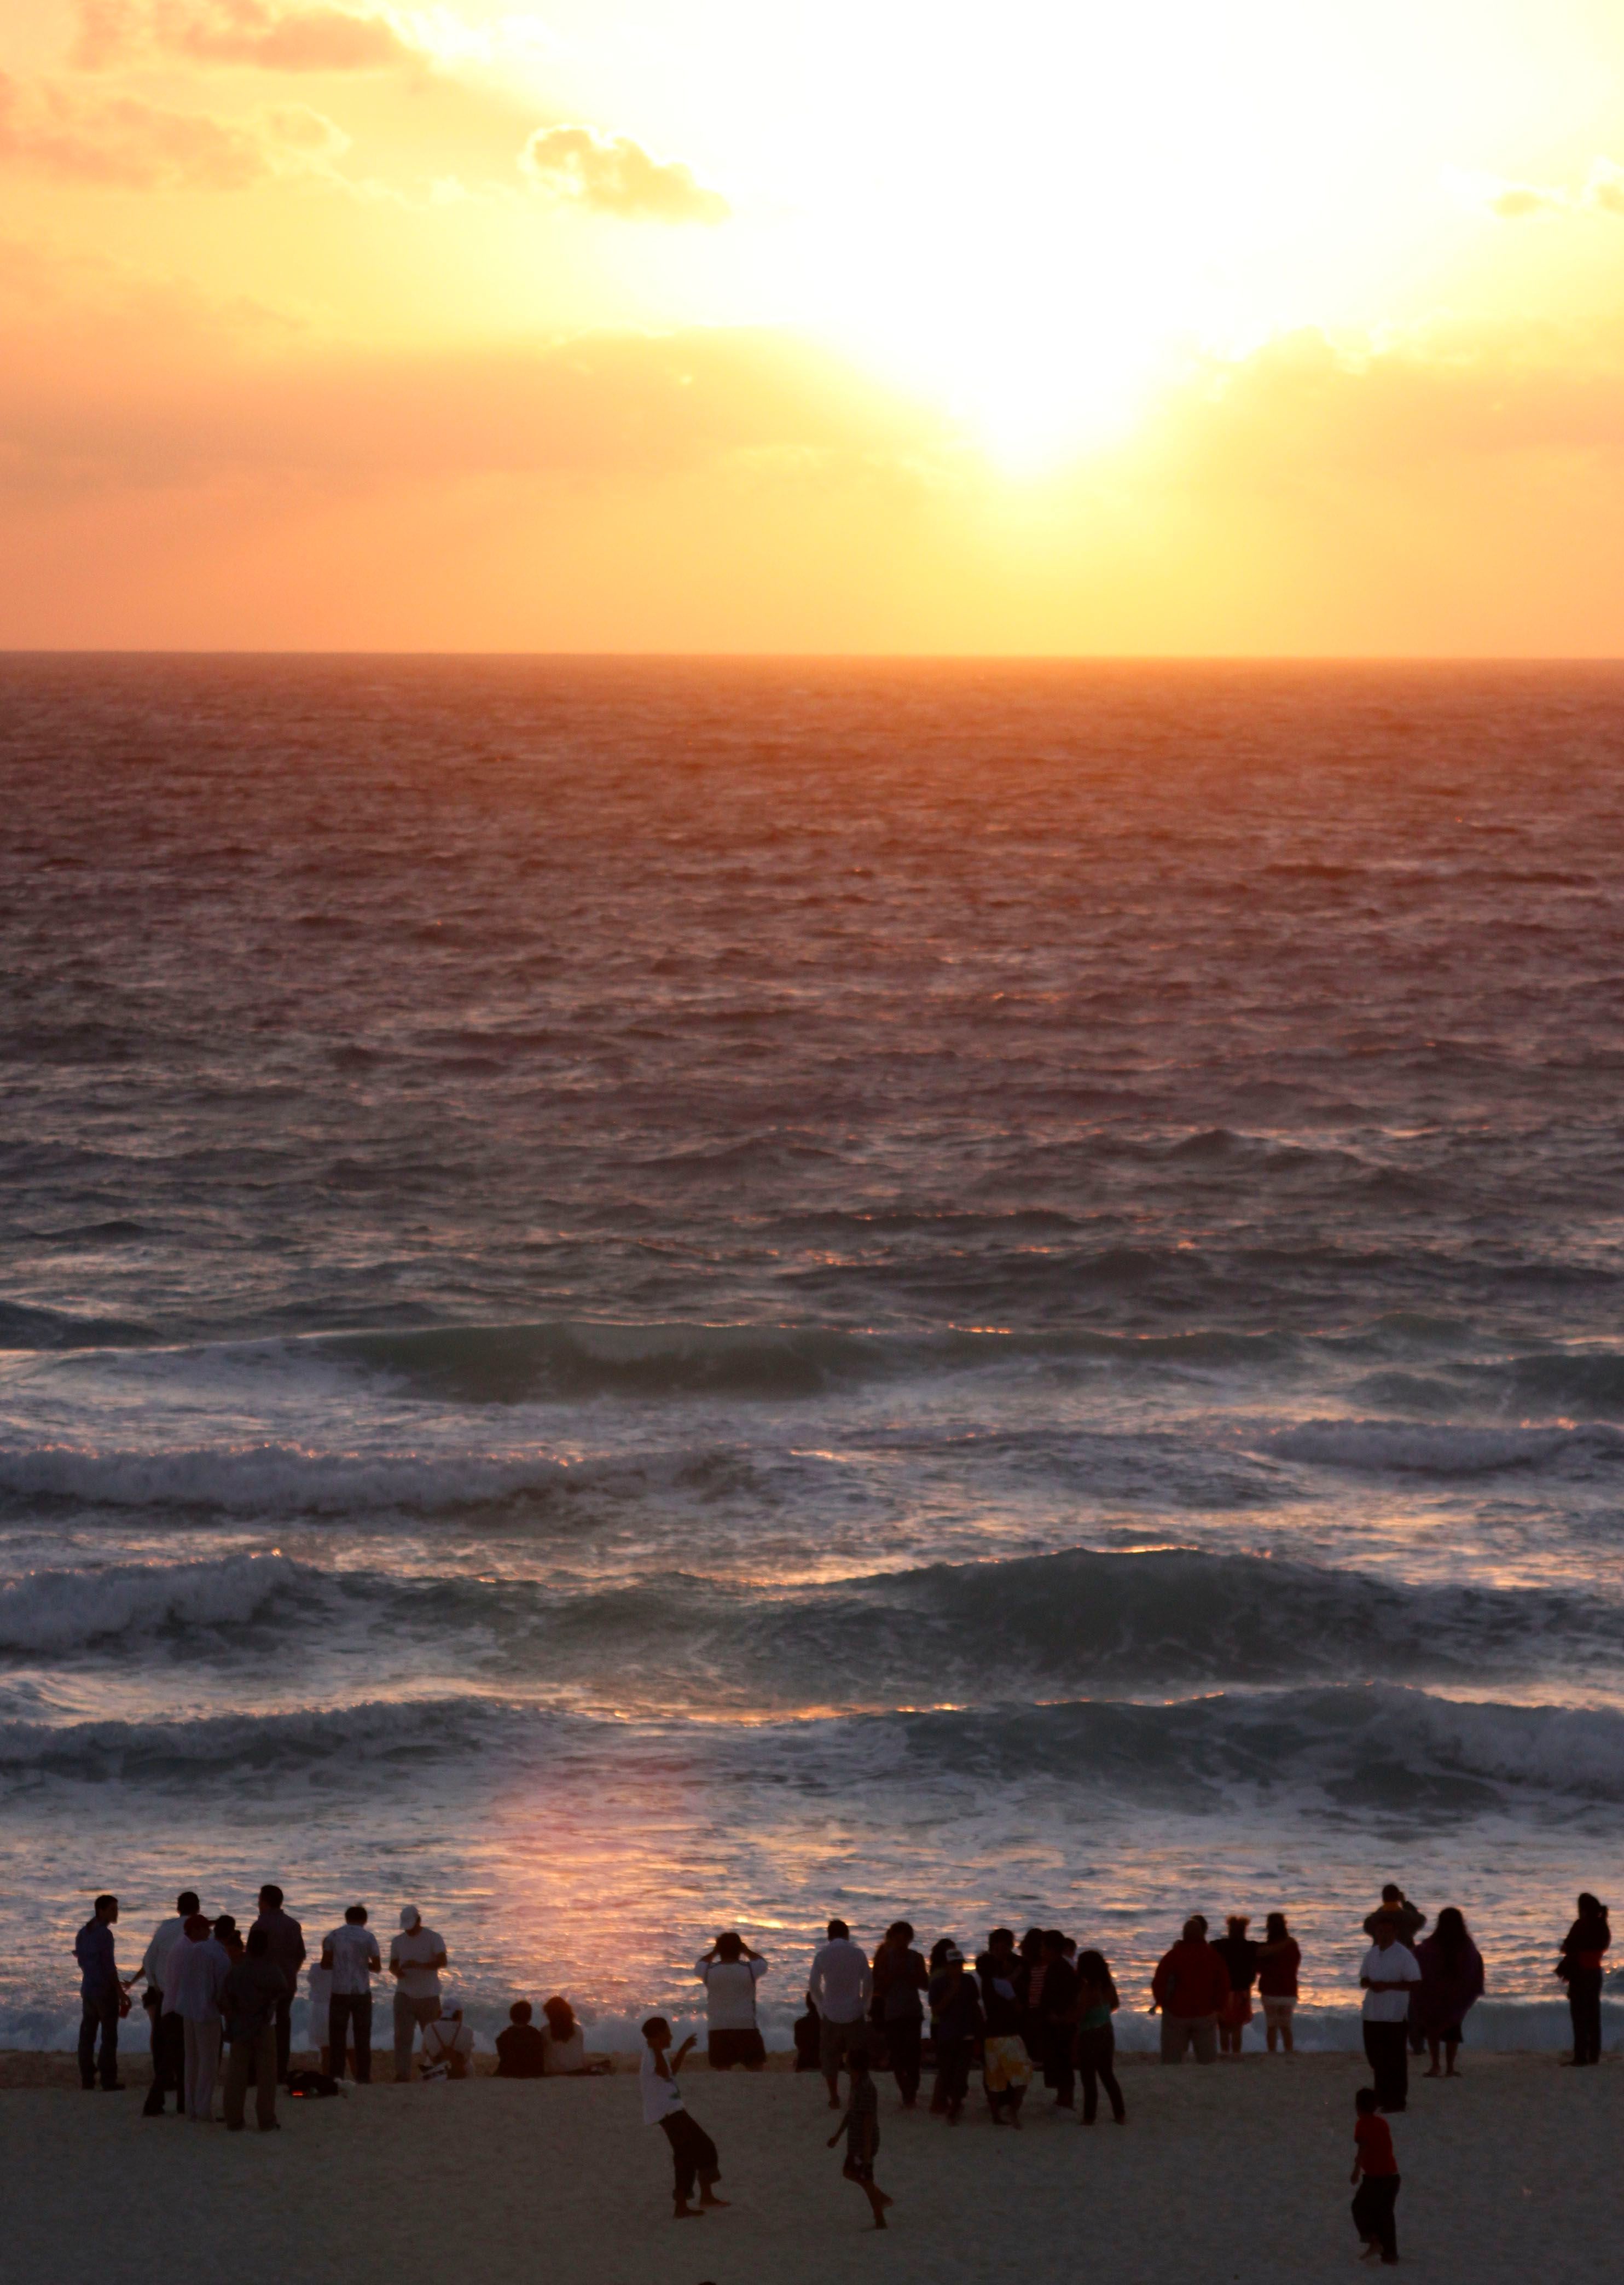 People watch the first sunrise of 2011 at a beach in Cancun, Mexico, Saturday, Jan. 1, 2011. (AP Photo/Israel Leal)